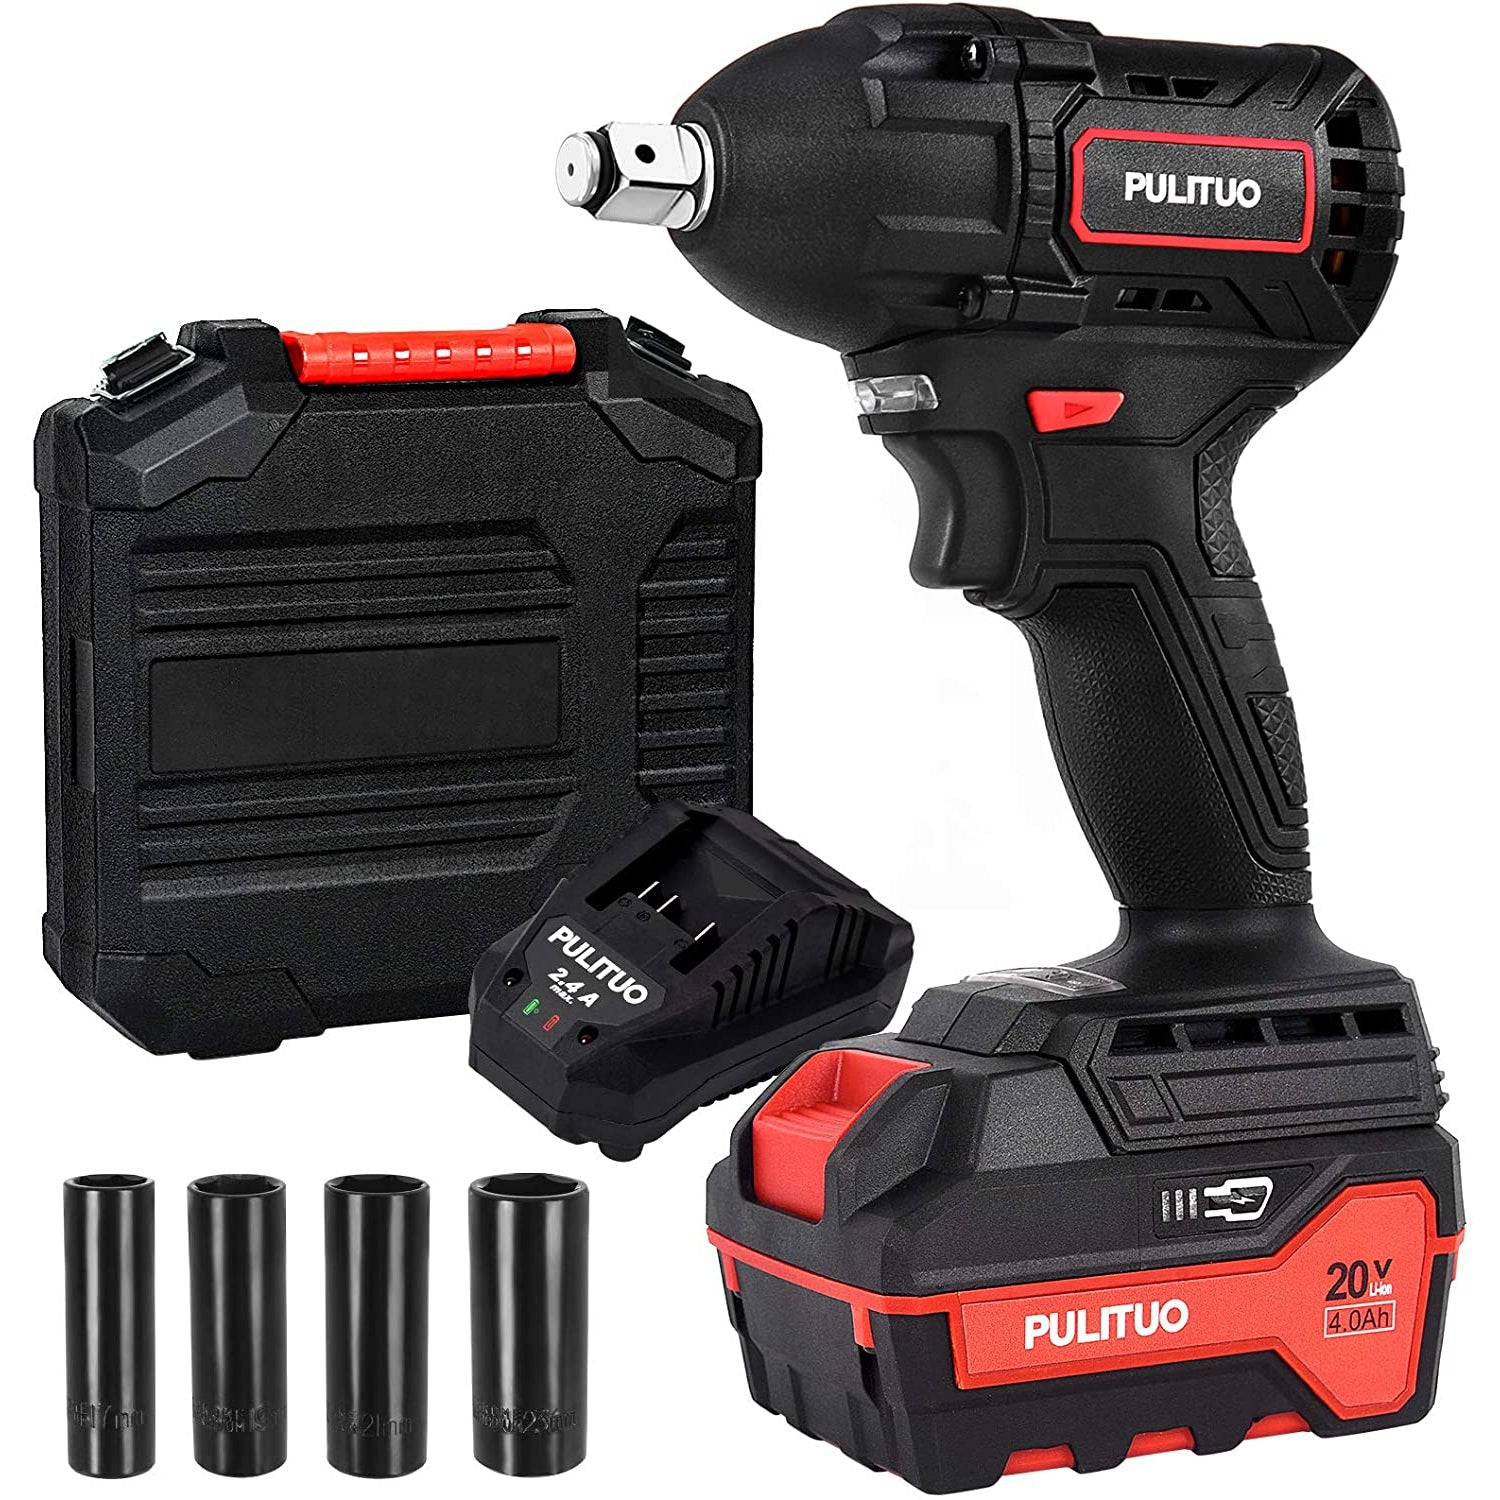 PULITUO 12V Cordless Impact Driver with 1/4Chuck, Max Torque 88